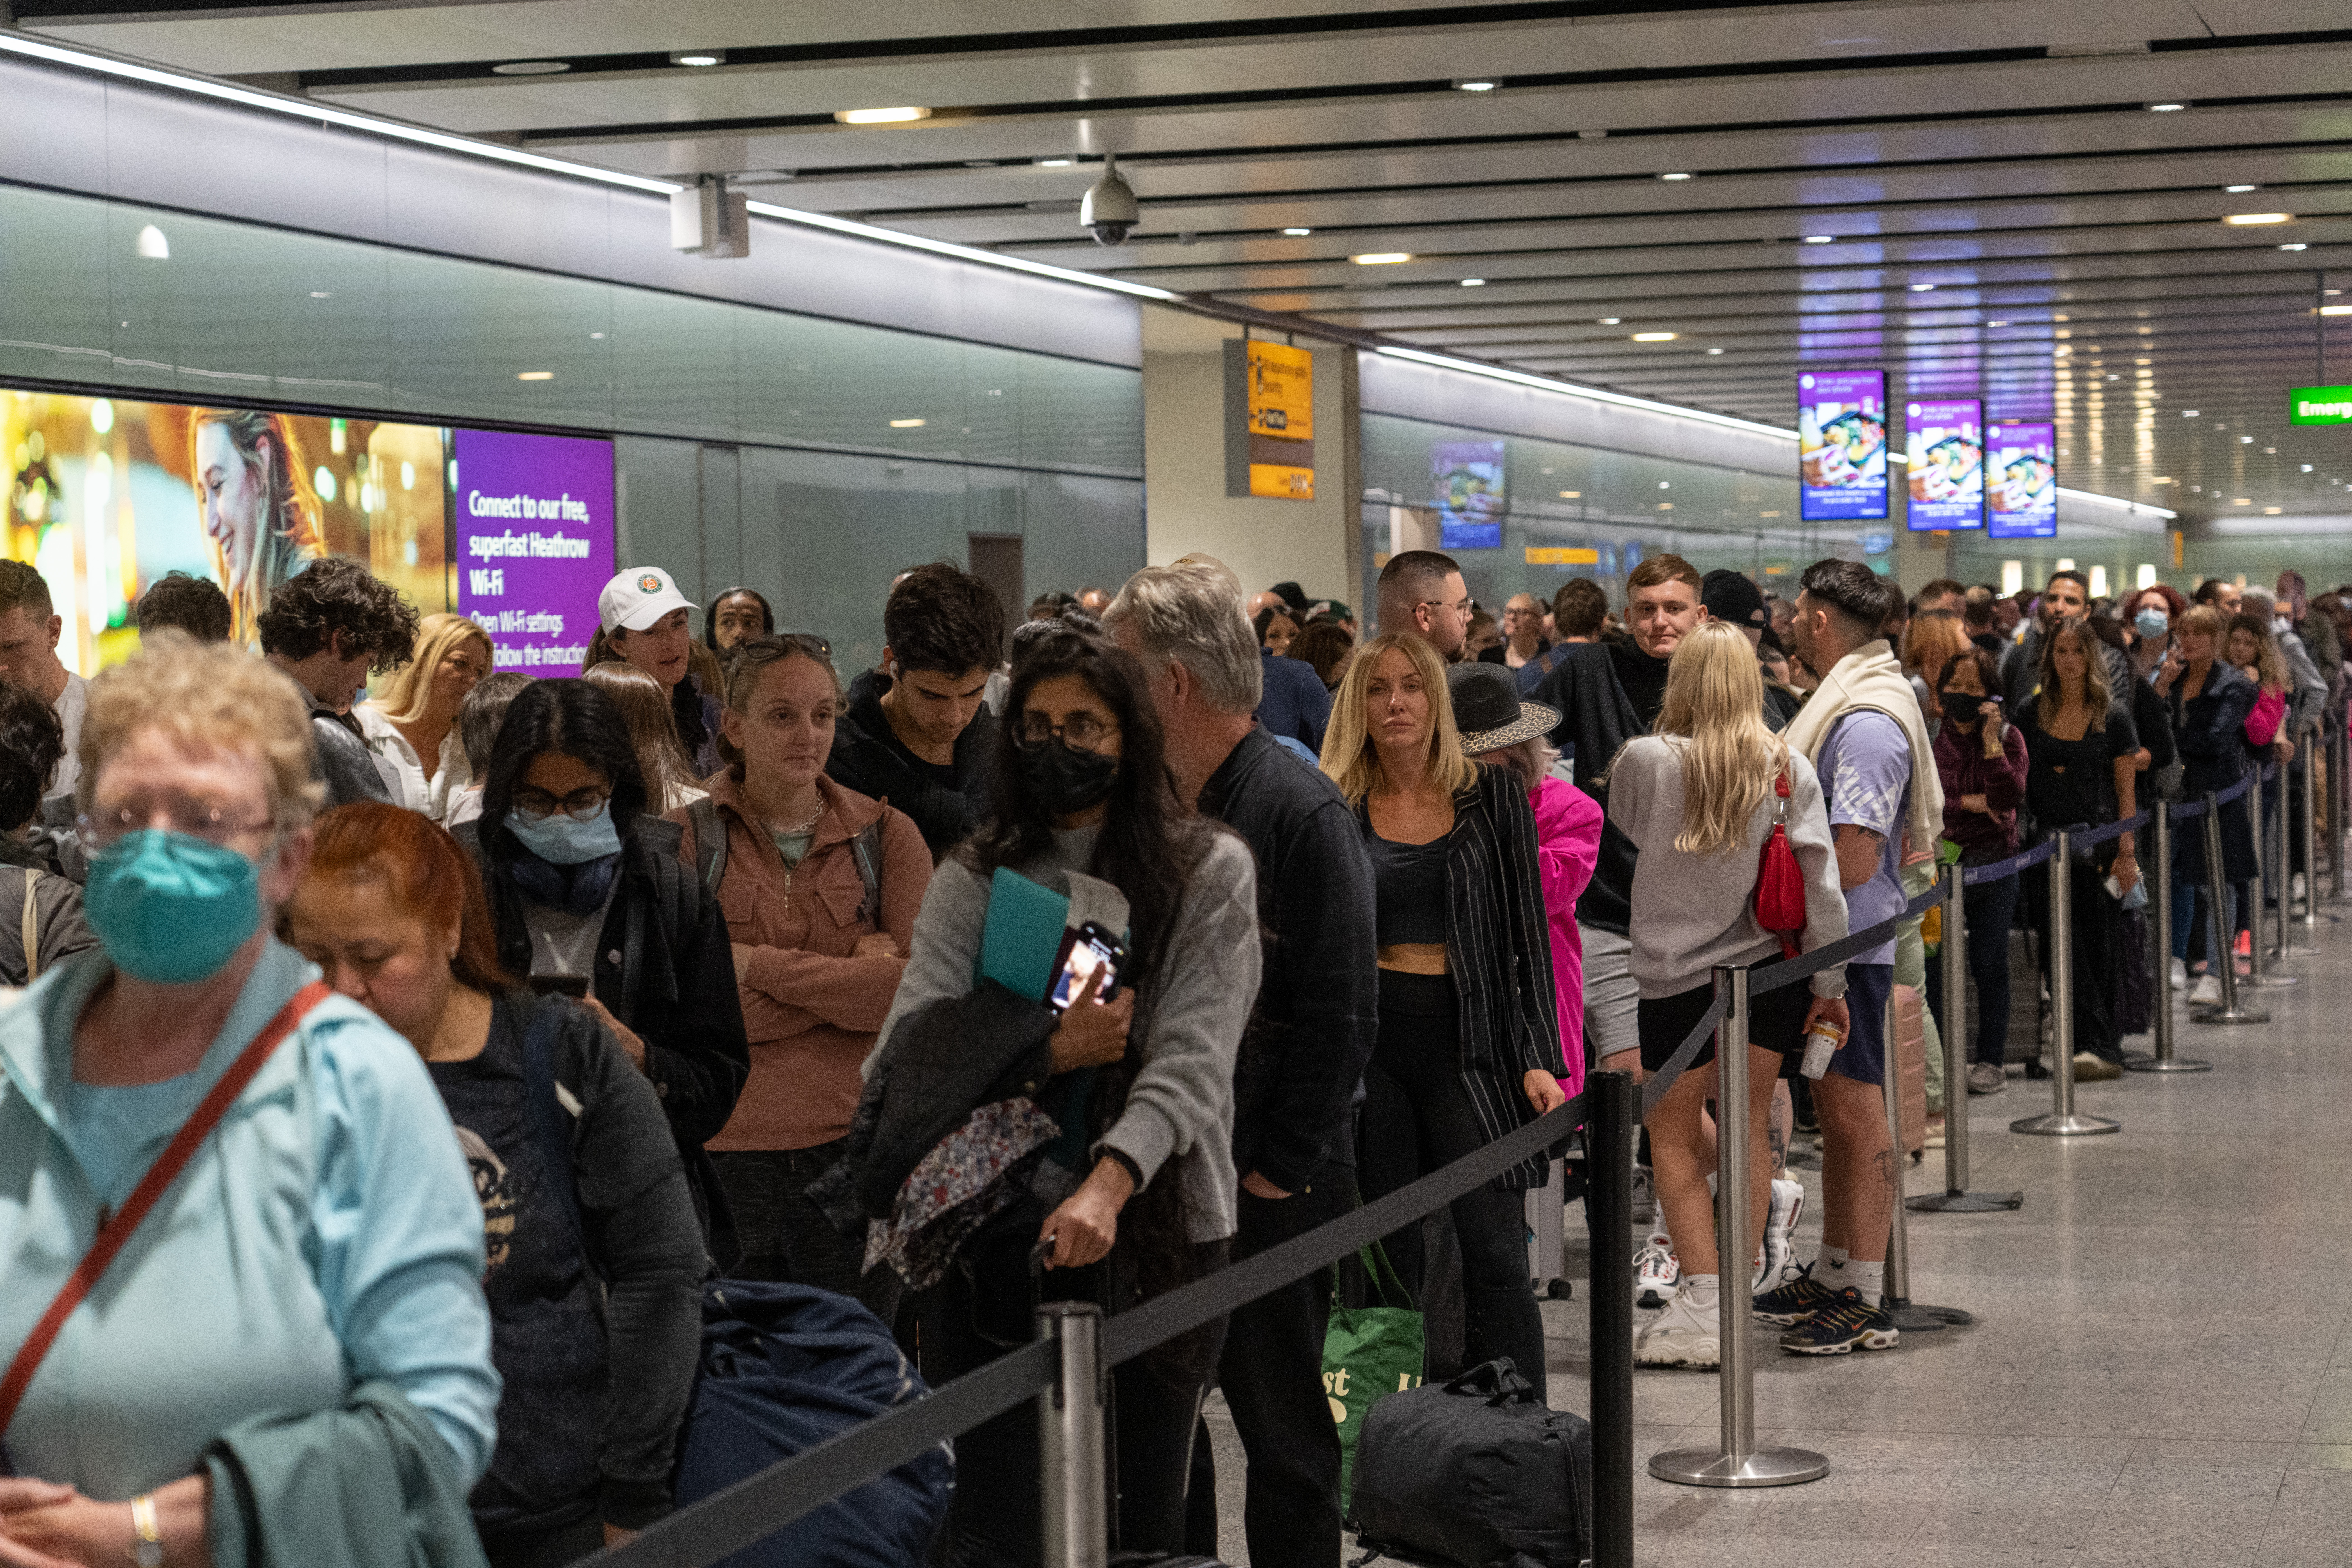 Passengers faced long queues for security as Heathrow airport struggled to handle demand in the summer